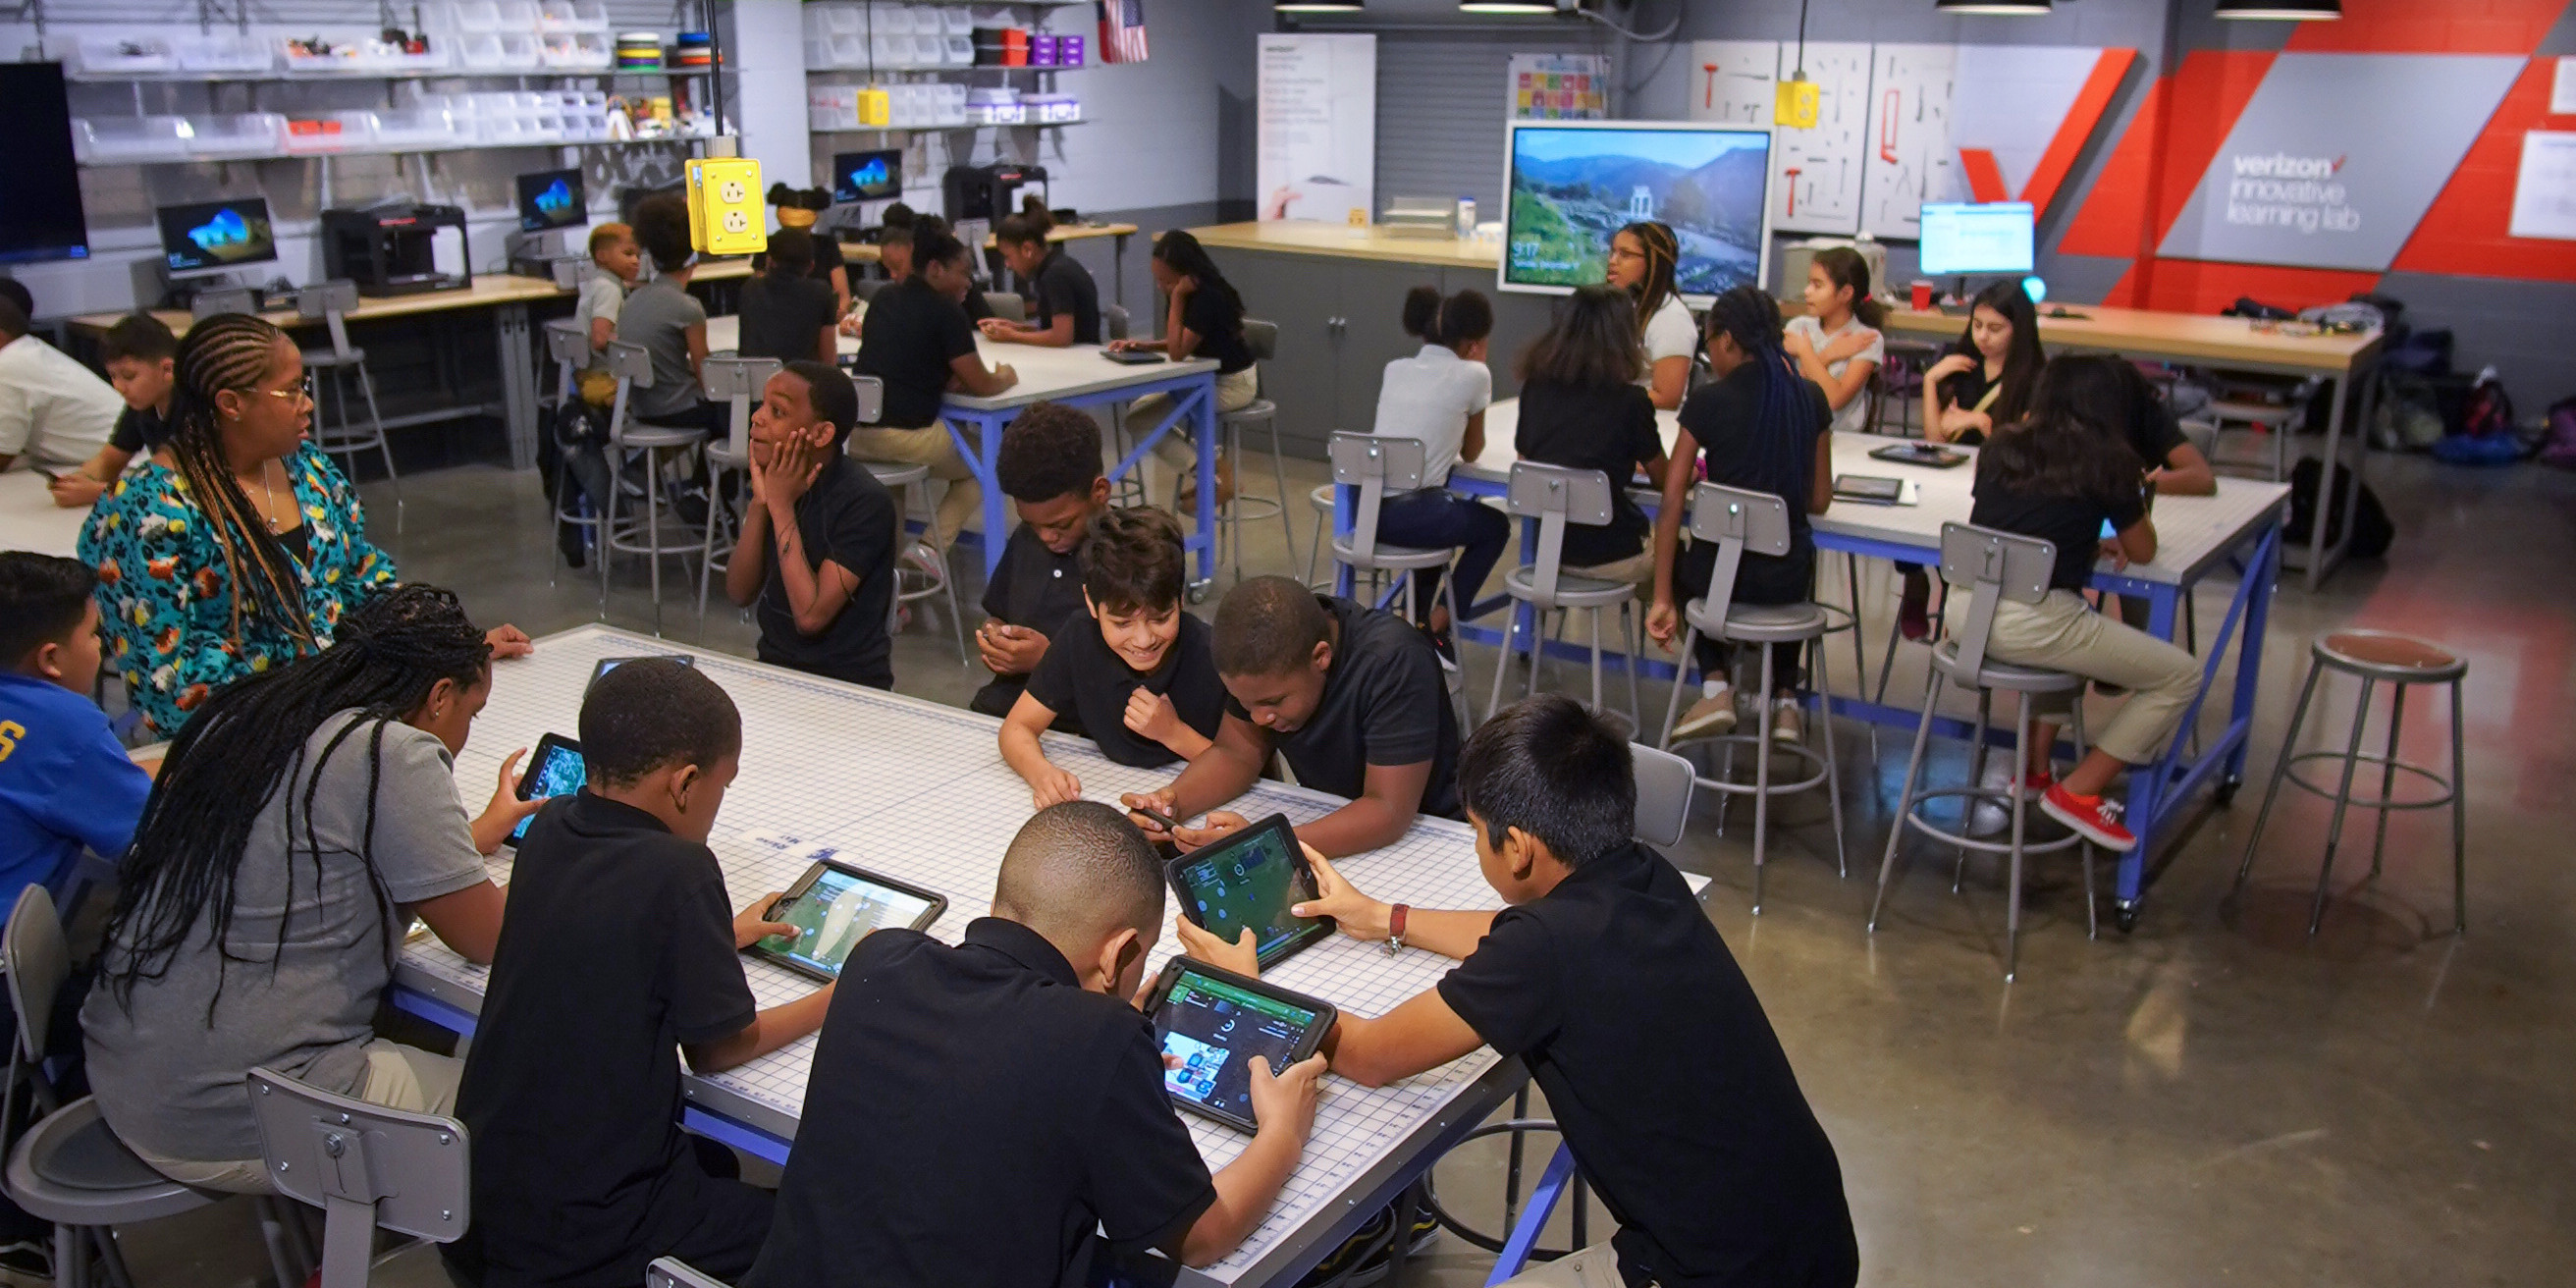 Students working on their tablets together at a table